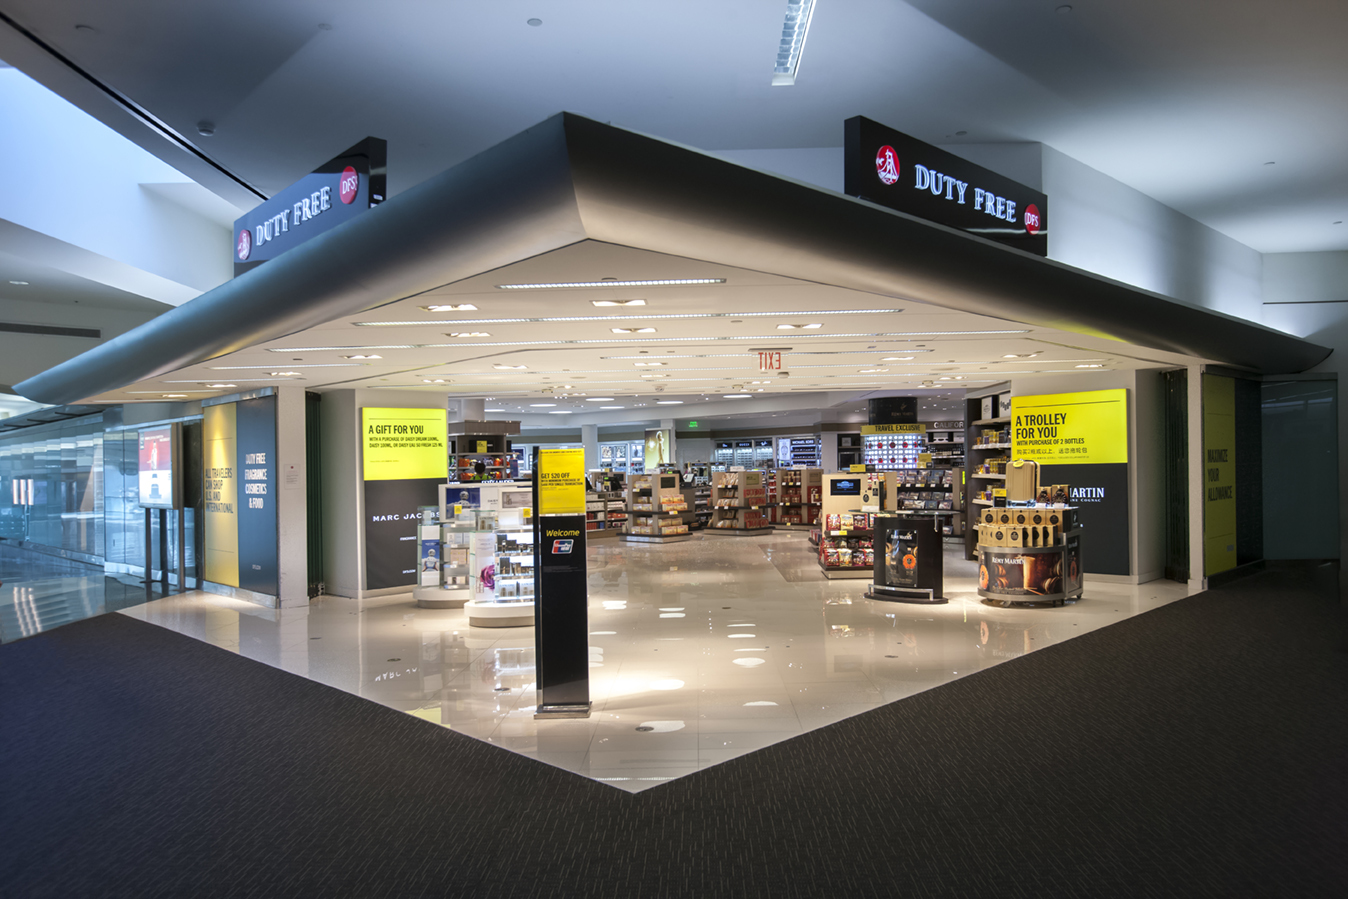 DFS Group and Ant Financial Introduce Alipay at DFS, San Francisco  International Airport